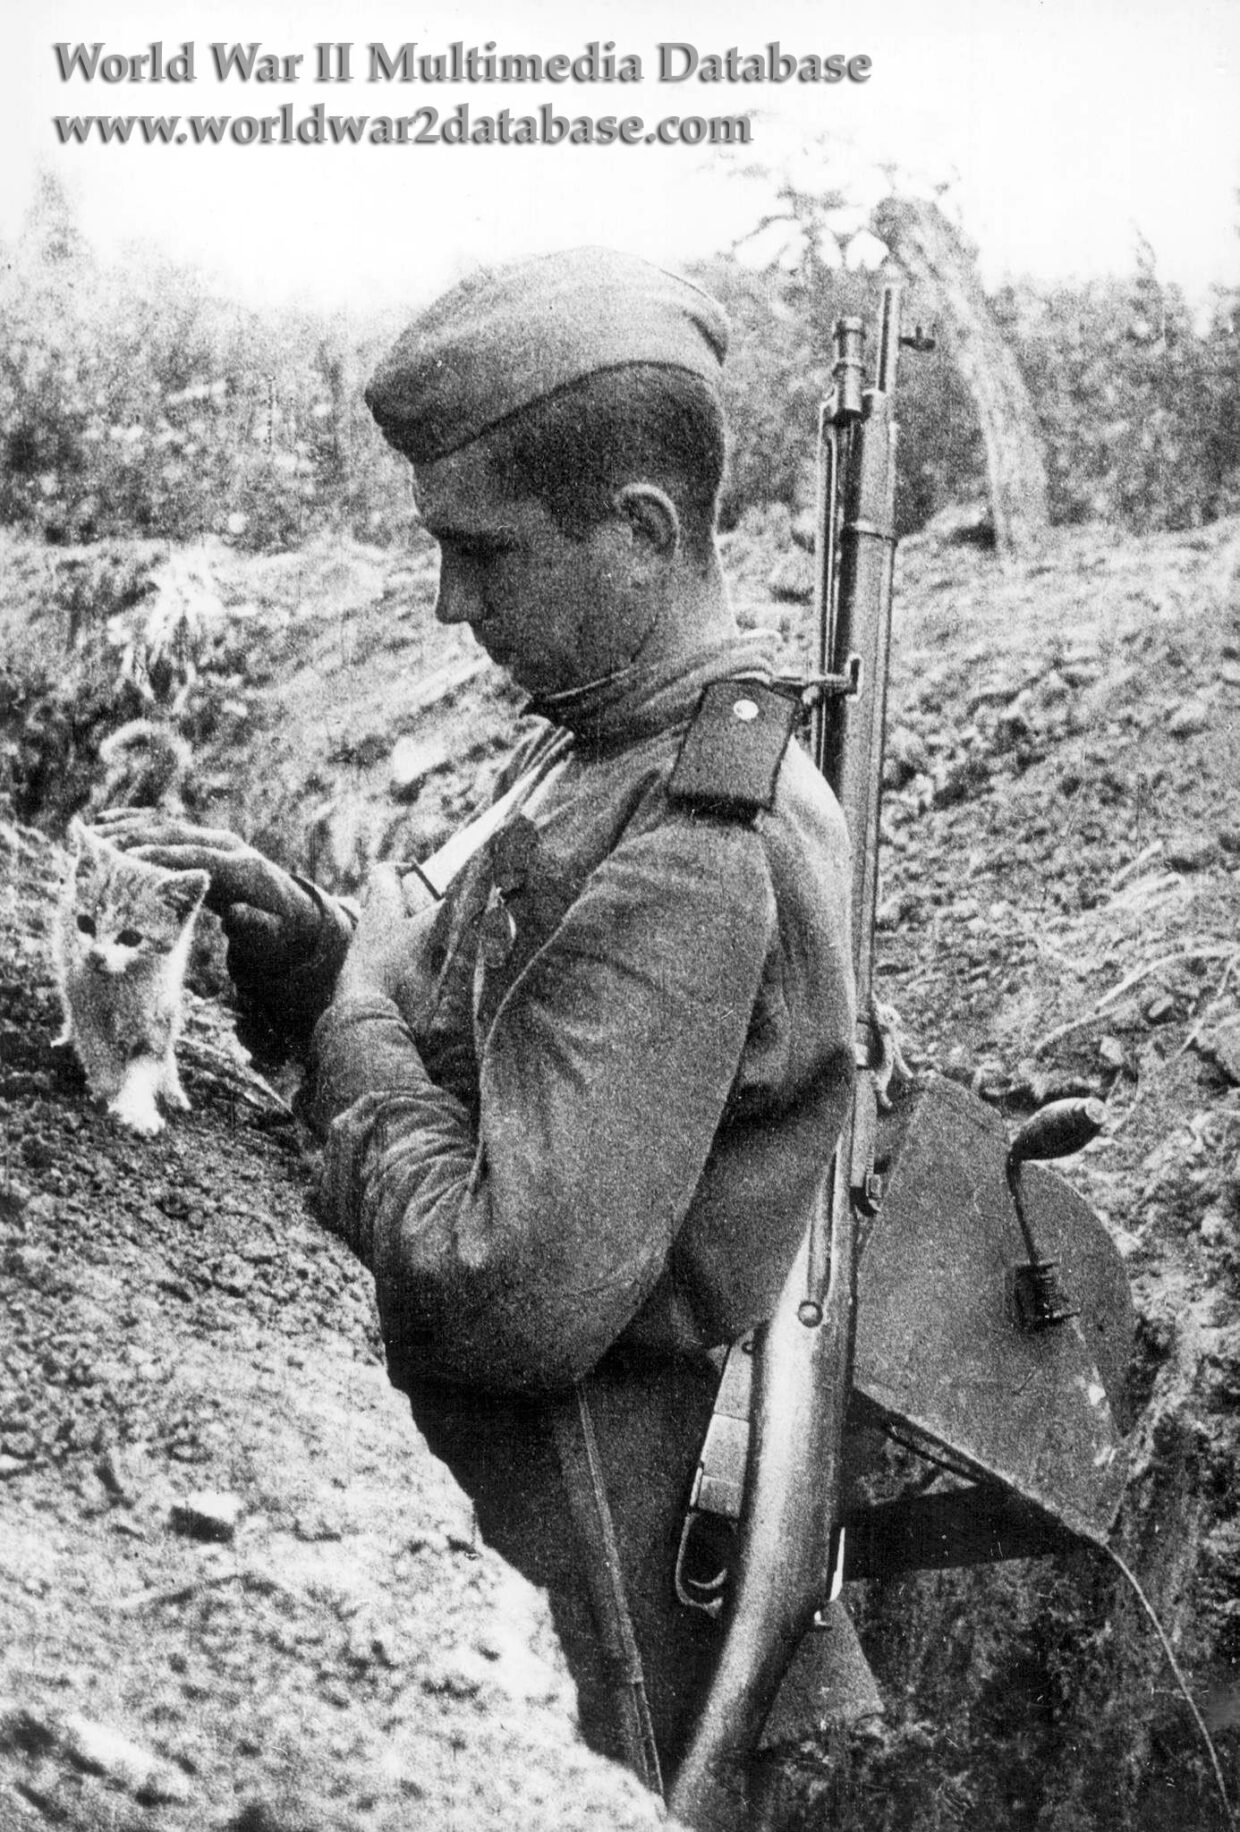 “Soviet Signalman Petting A Kitten On The Breastwork Trenches”